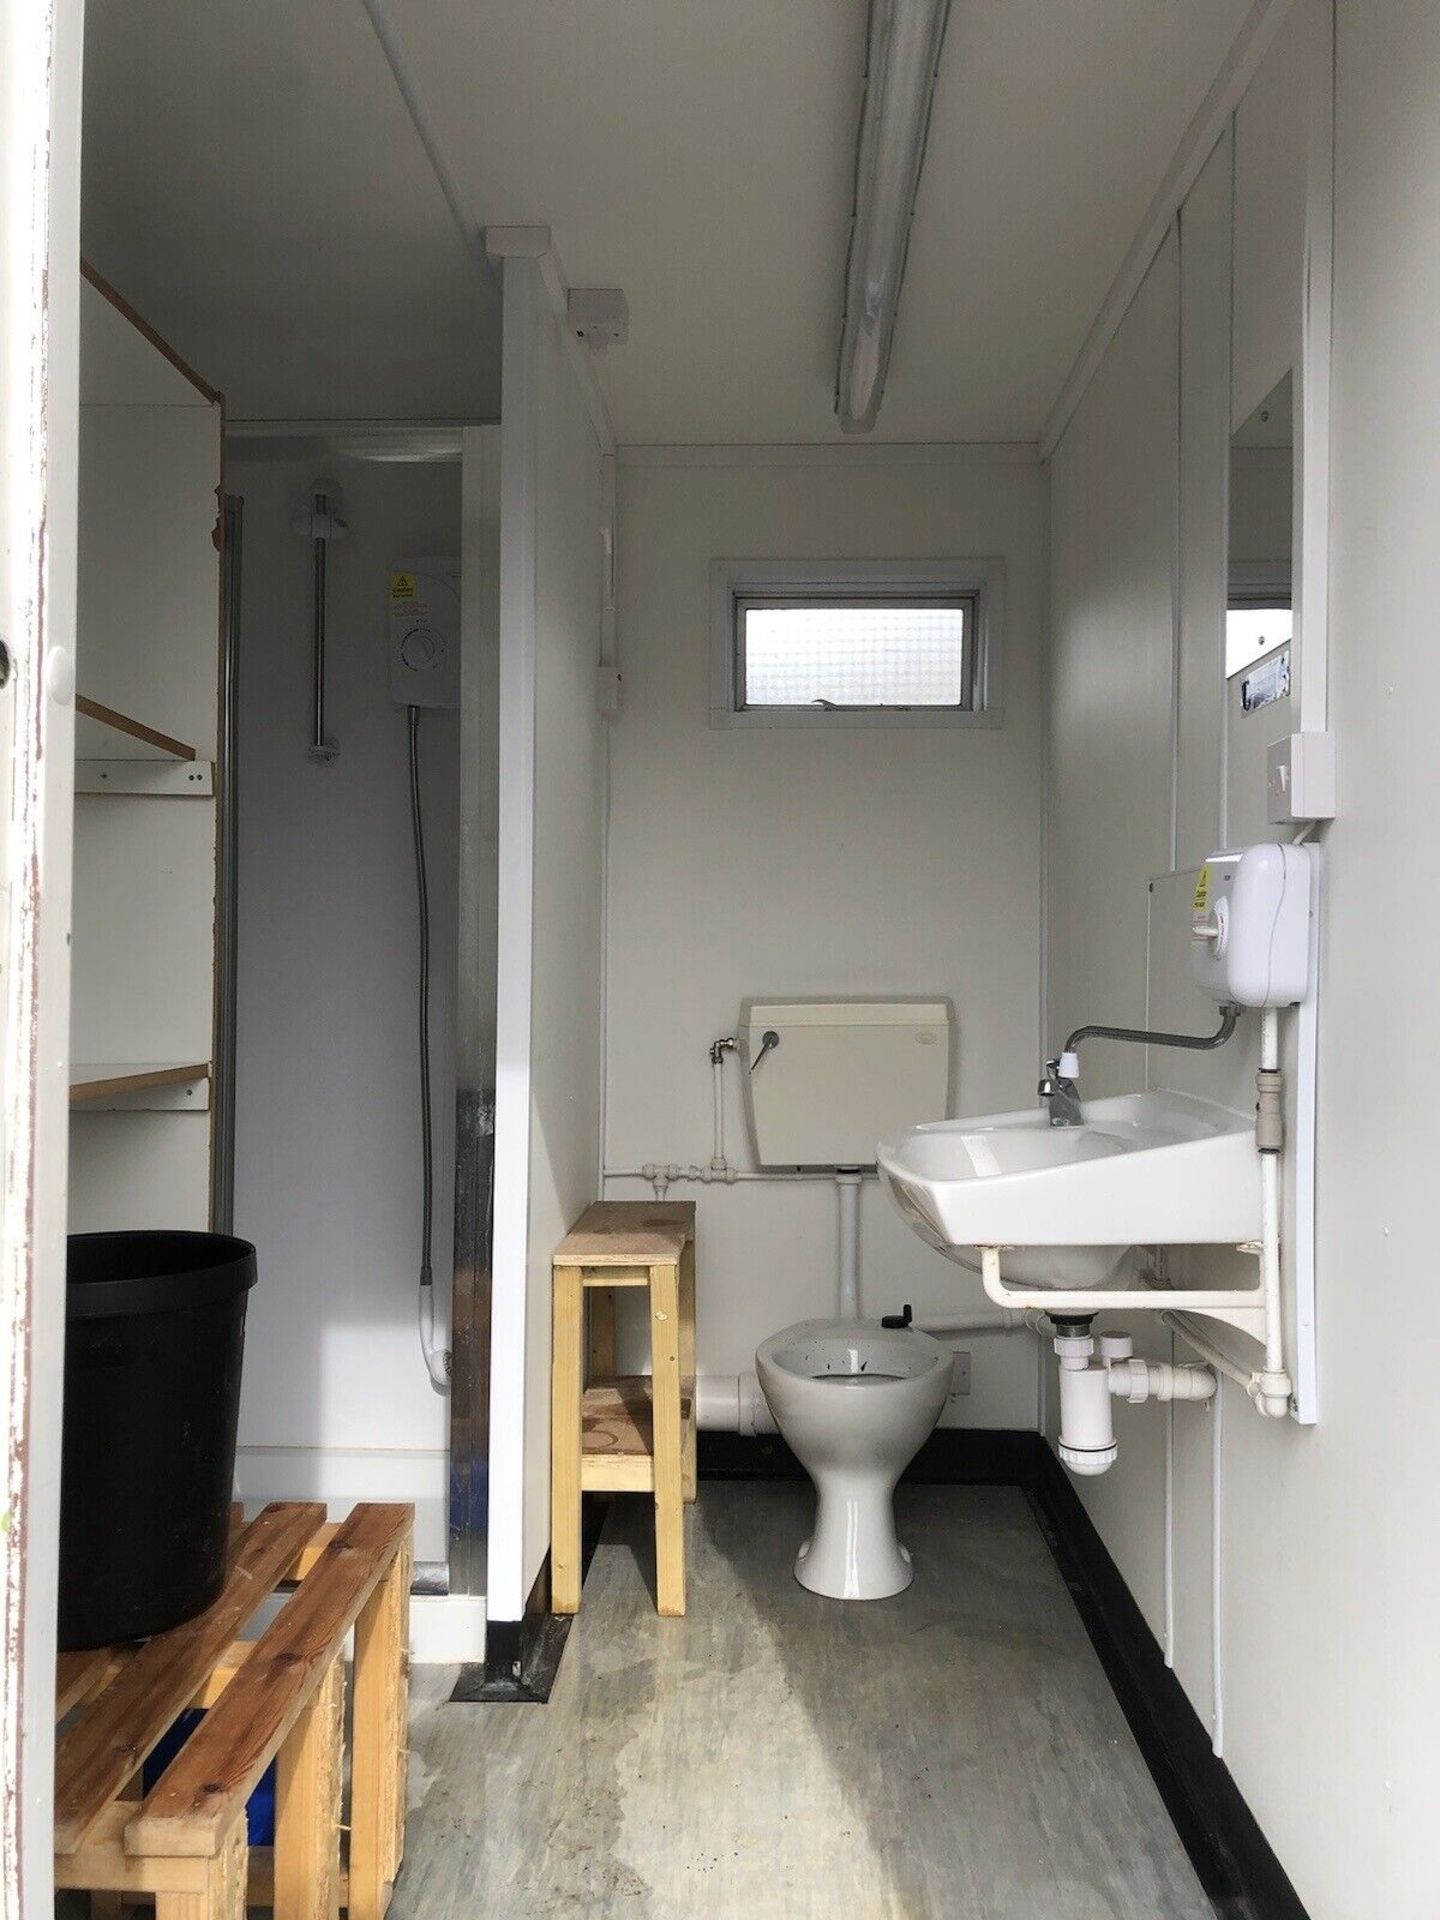 Portable Toilet Block With Shower Disabled Wheelchair Access - Image 8 of 10